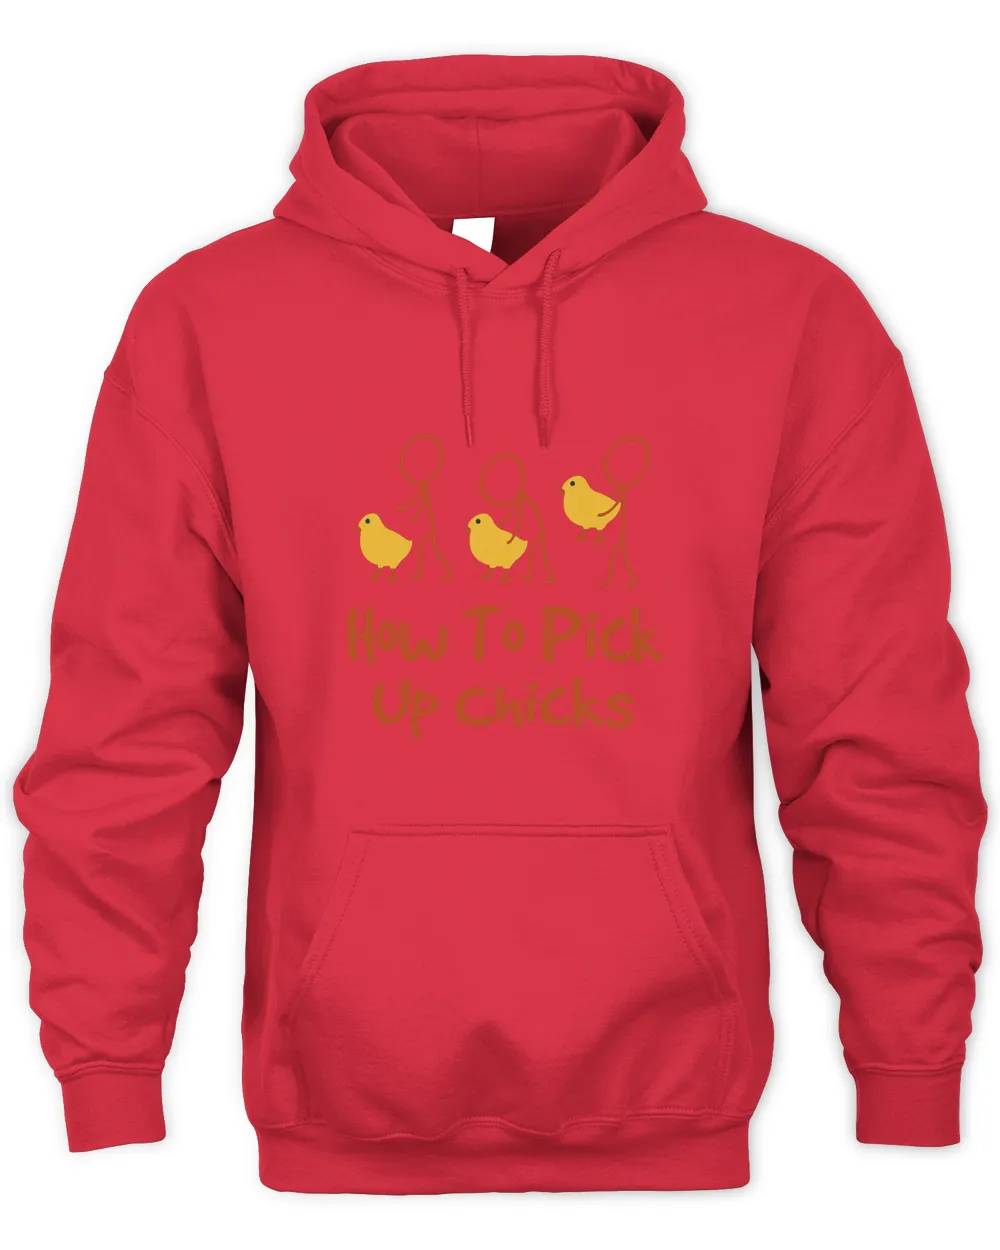 How to Pick Up Chicks Funny Chicken Lover Designs